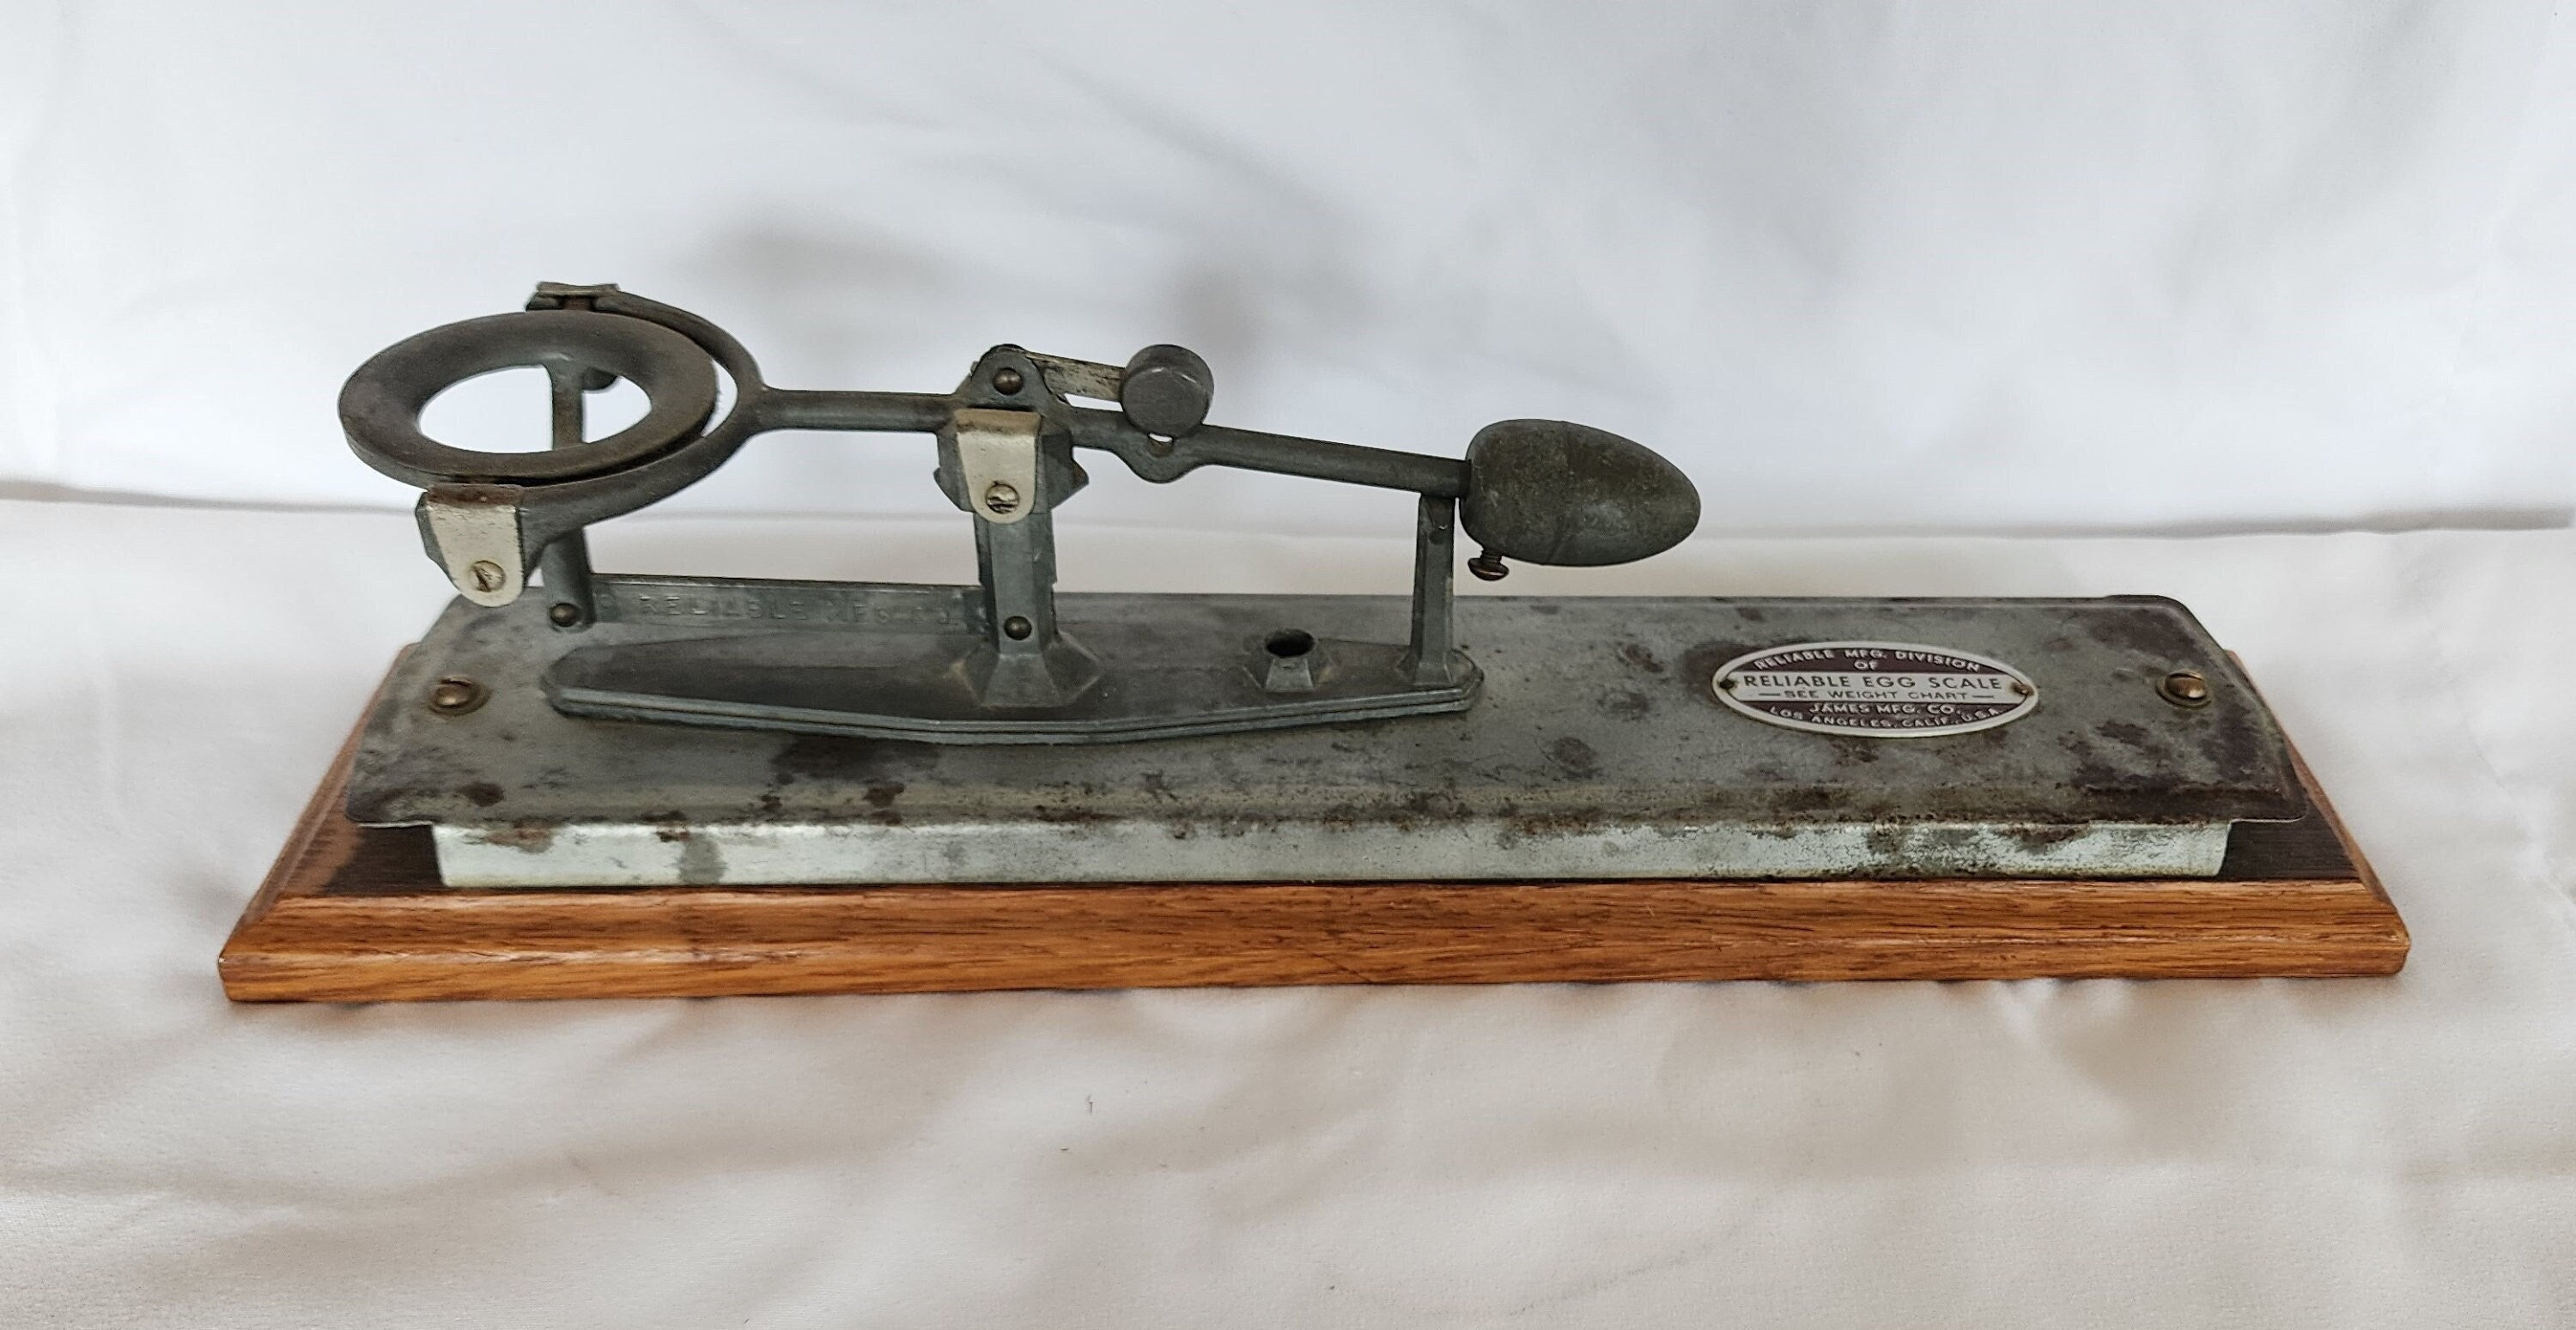 Circa 1949, Reliable Egg Scale, James Mfg. Co, with Original Instructions  and Weight Chart